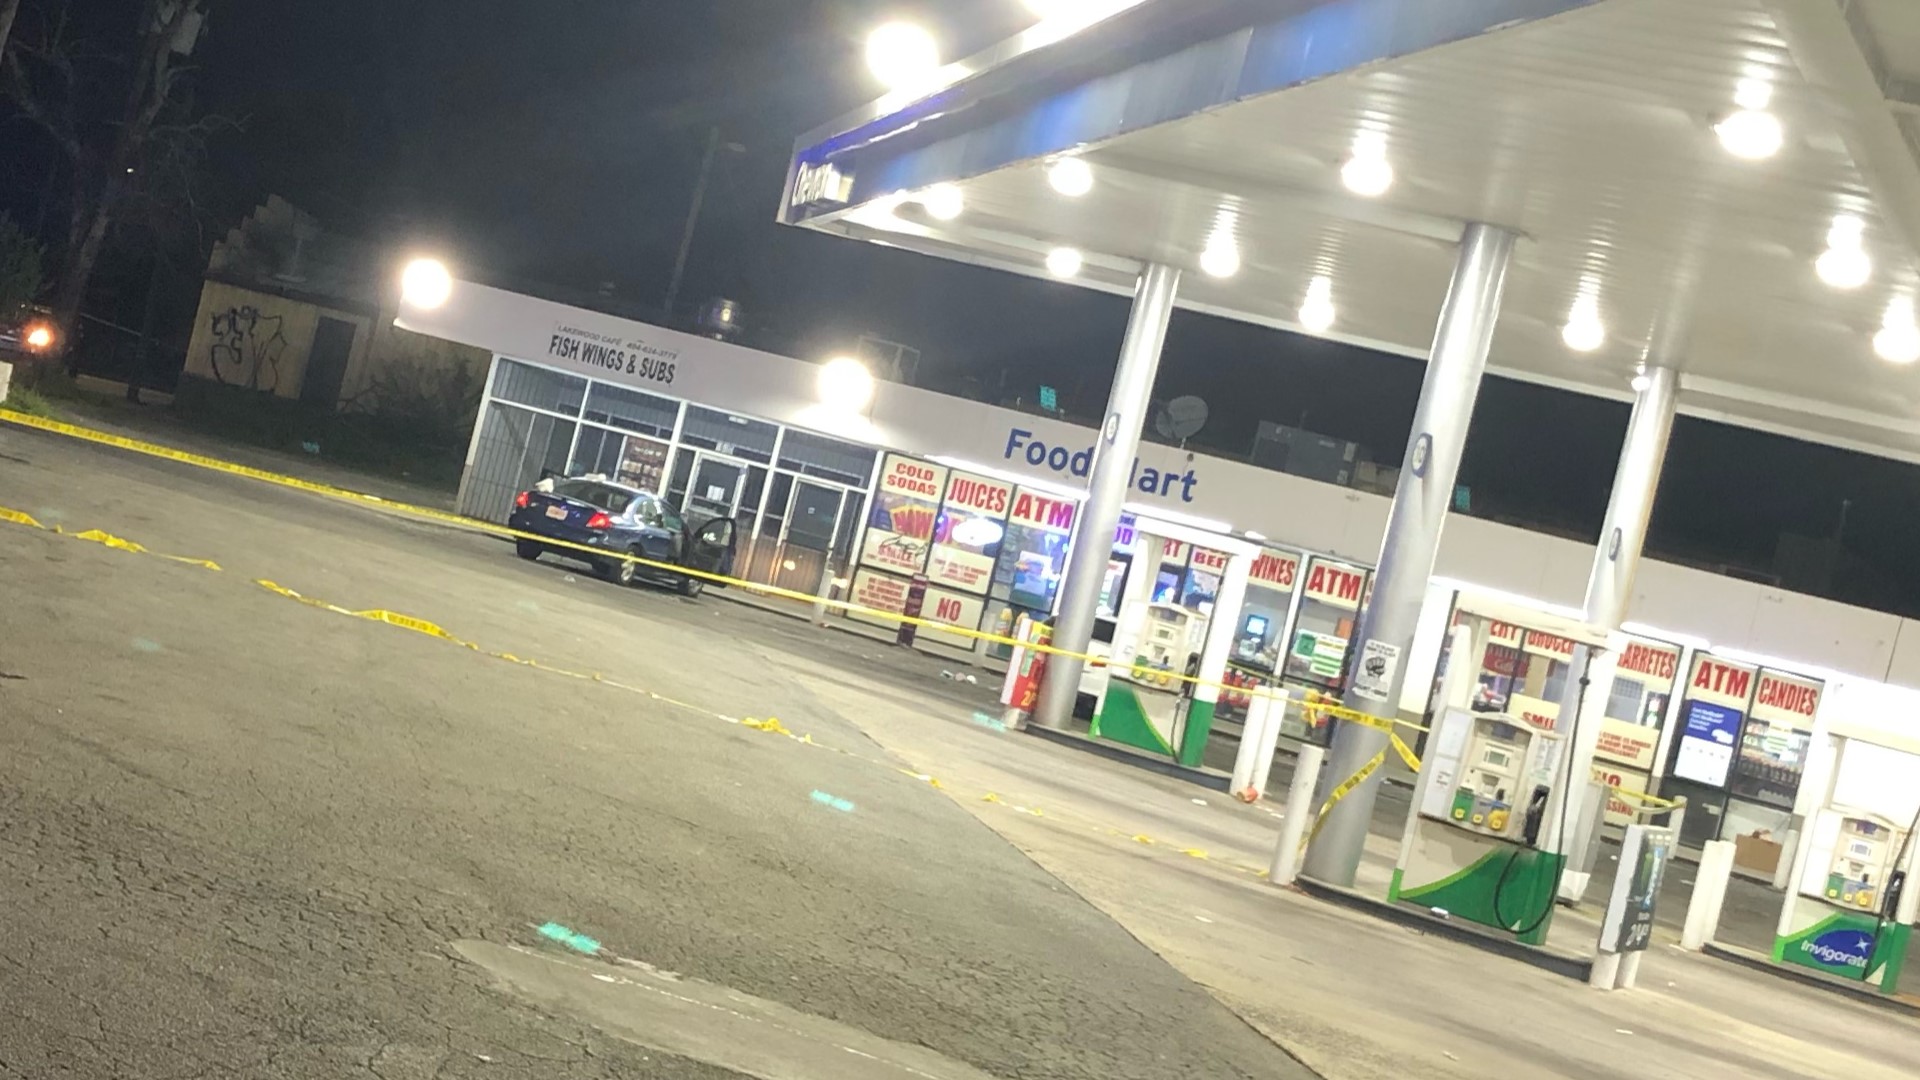 It happened at a Chevron. The woman was taken to the hospital.